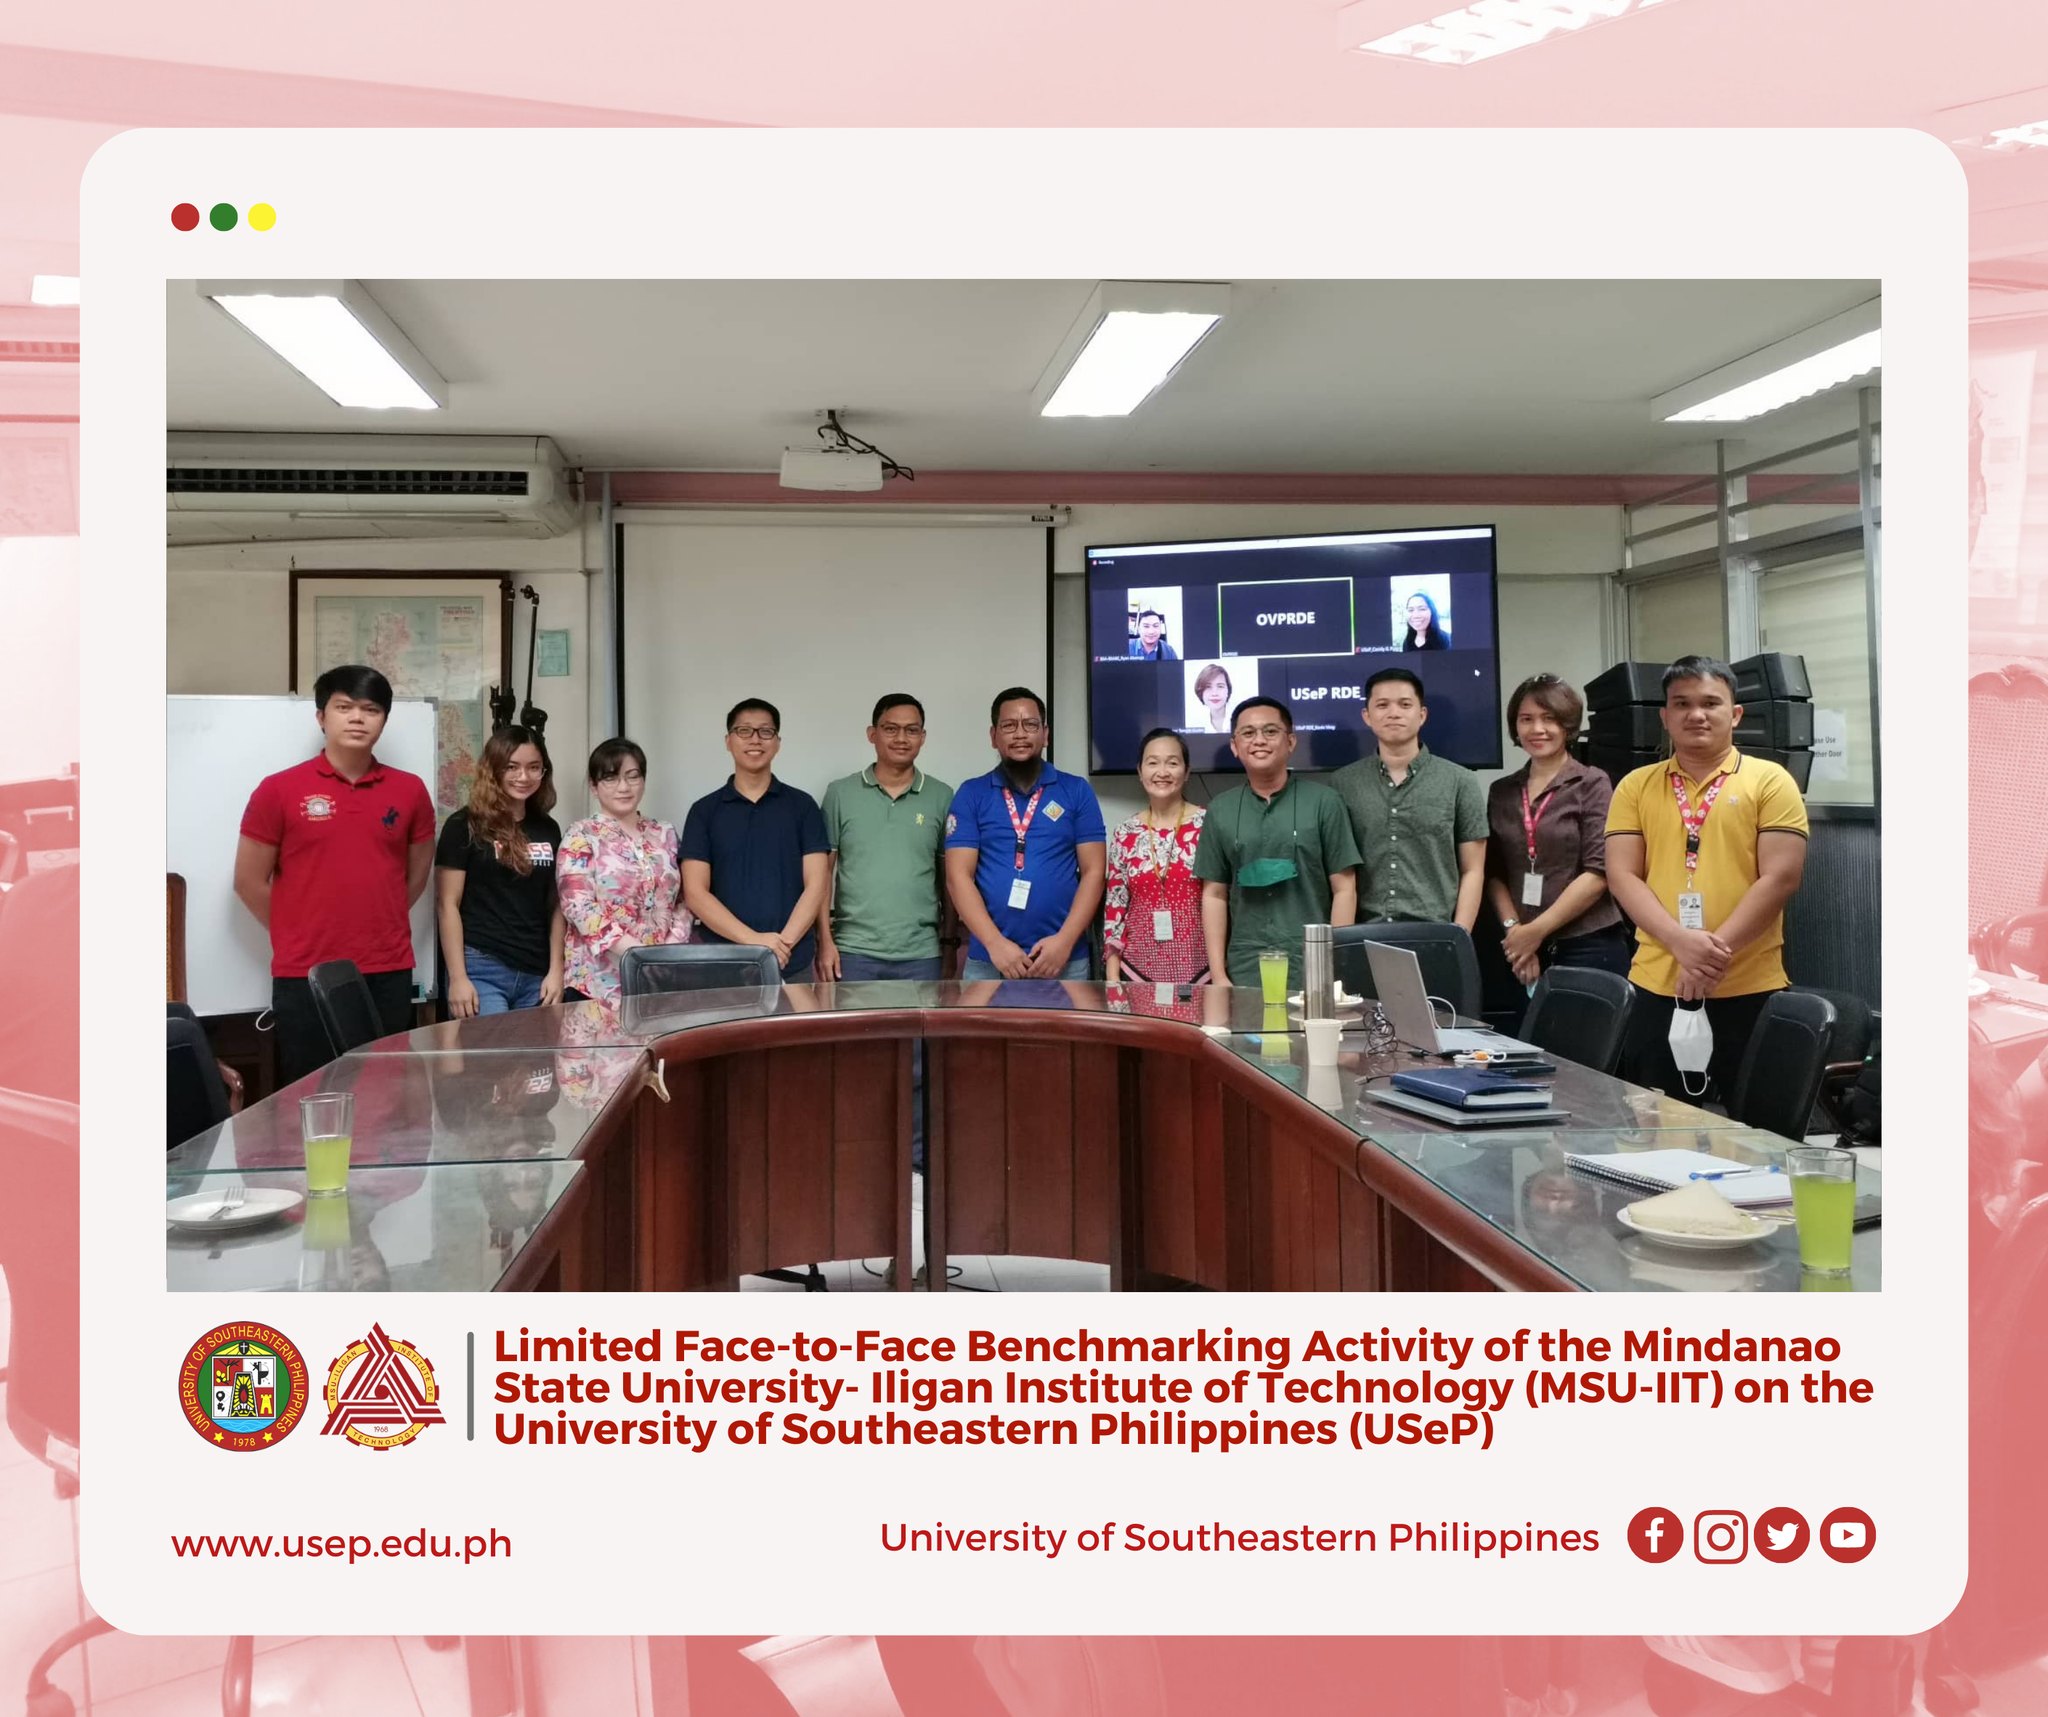 Benchmarking Activity of Mindanao State University- Iligan Institute of Technology (MSU-IIT) to USeP Research, Development, and Extension (RDE)